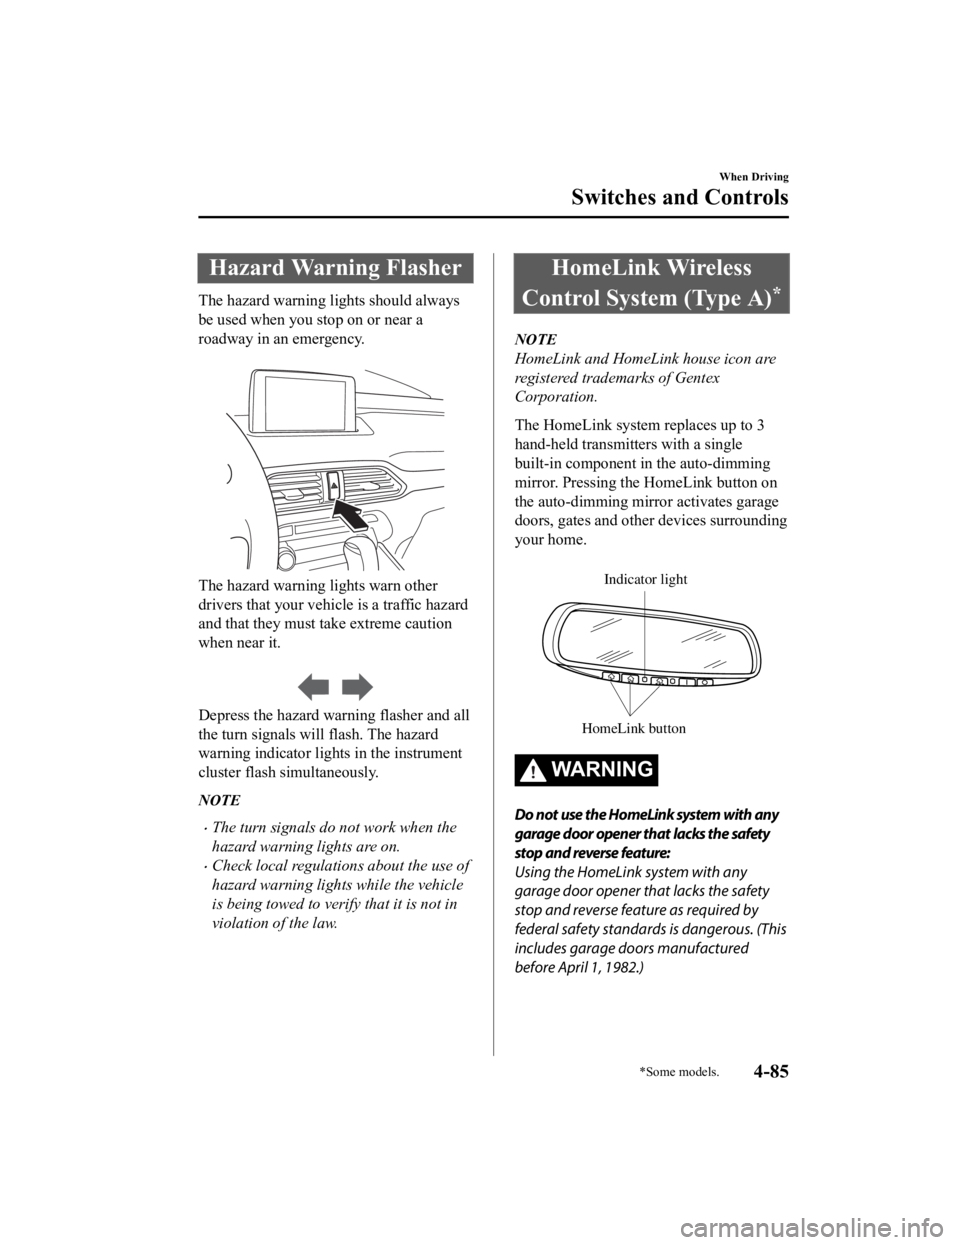 MAZDA CX9 2023  Owners Manual Hazard Warning Flasher
The hazard warning lights should always
be used when you stop on or near a
roadway in an emergency.
 
The hazard warning lights warn other
drivers that your vehicle is a traffic